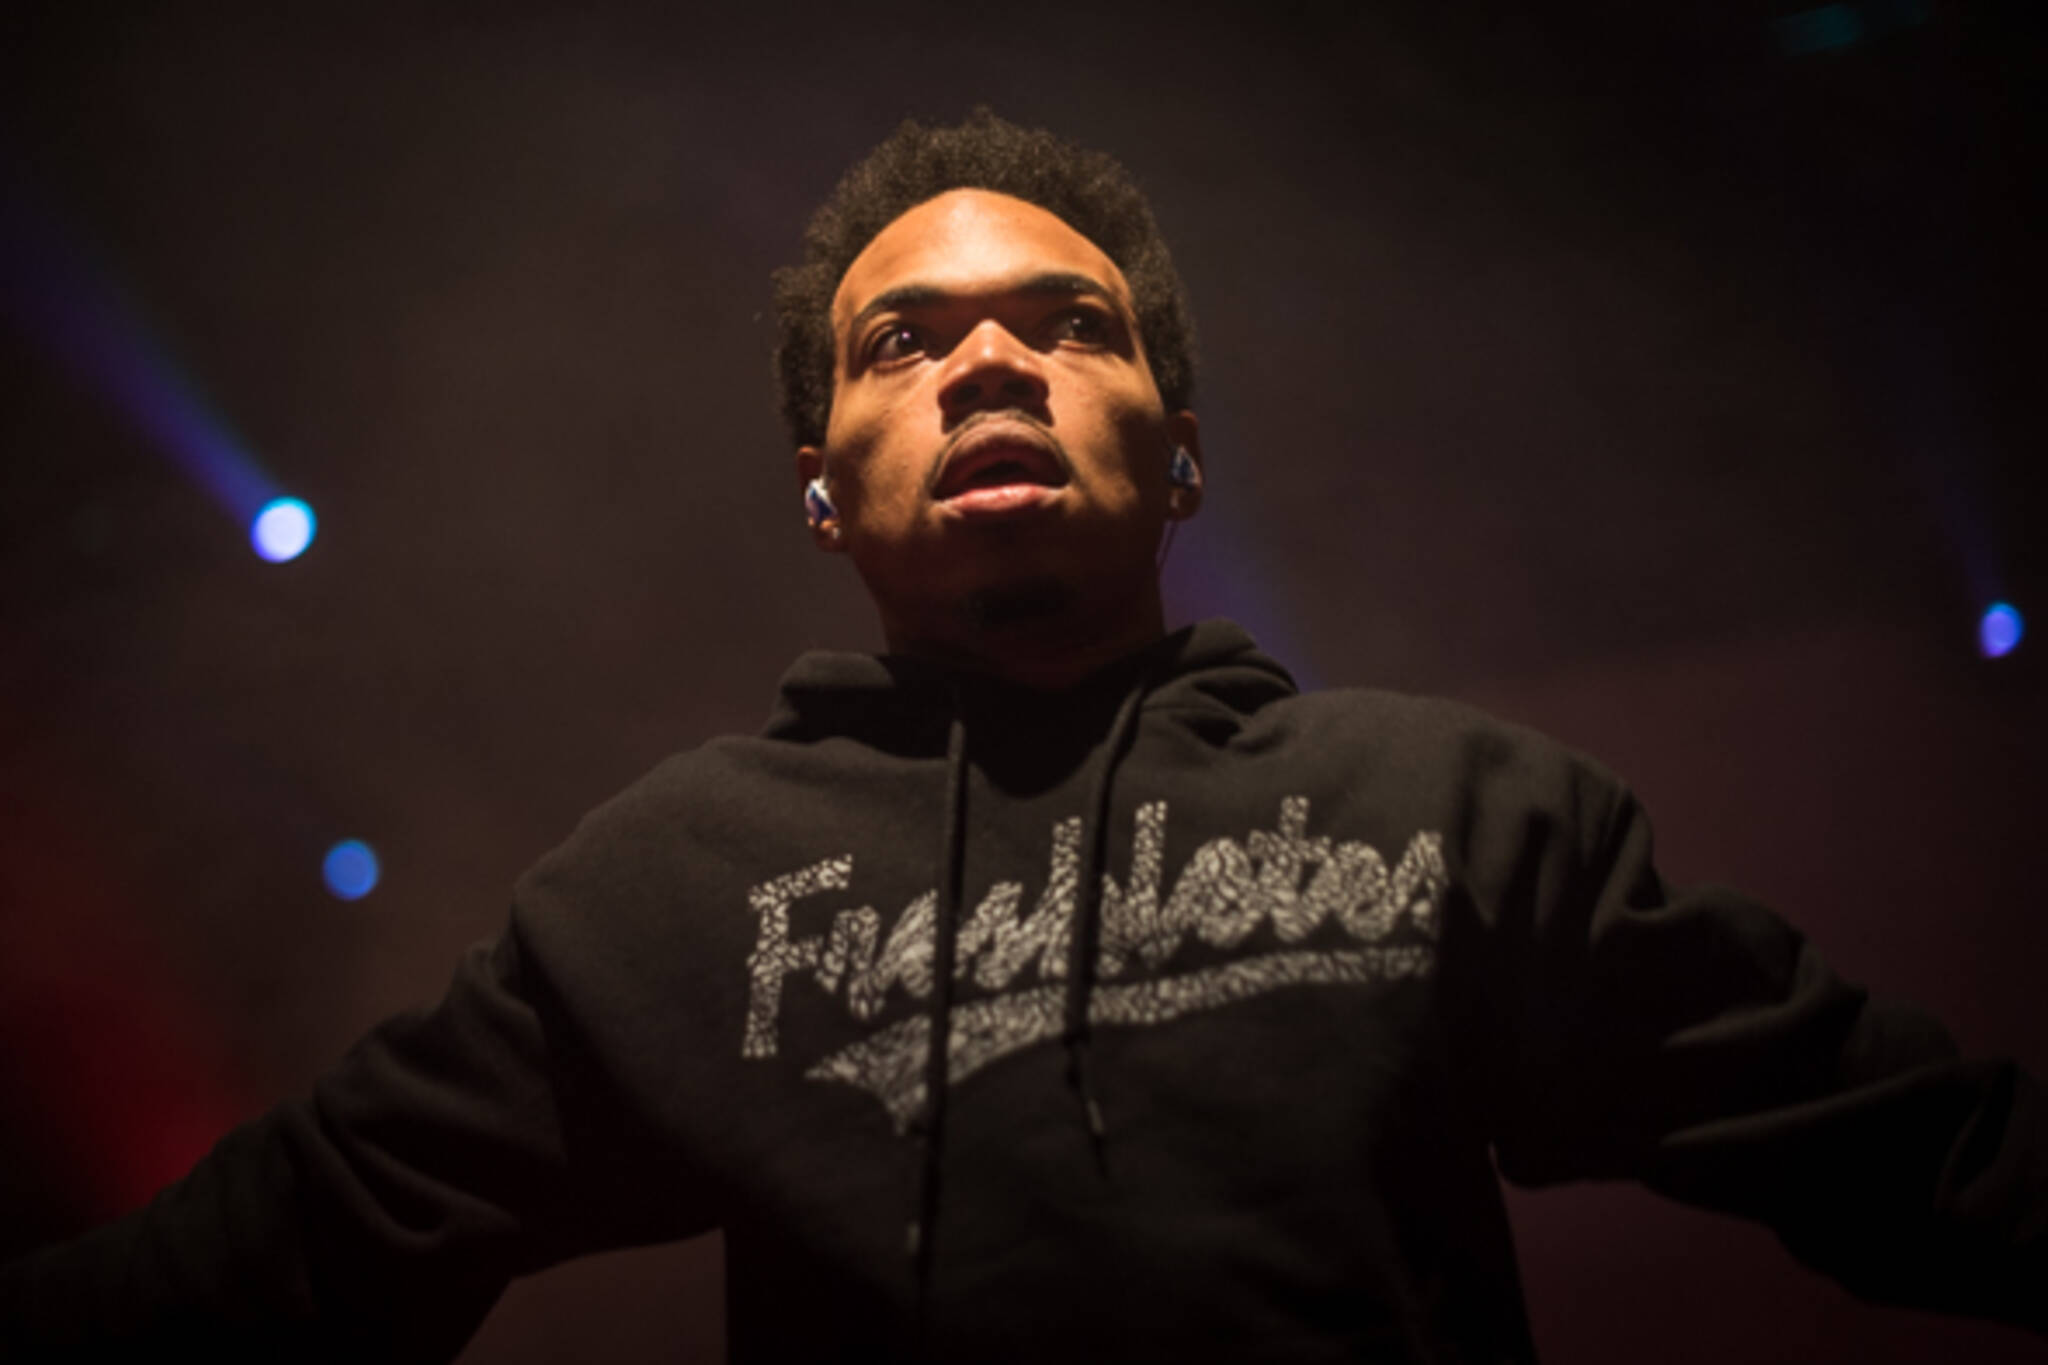 Chance the Rapper at the Danforth Music Hall